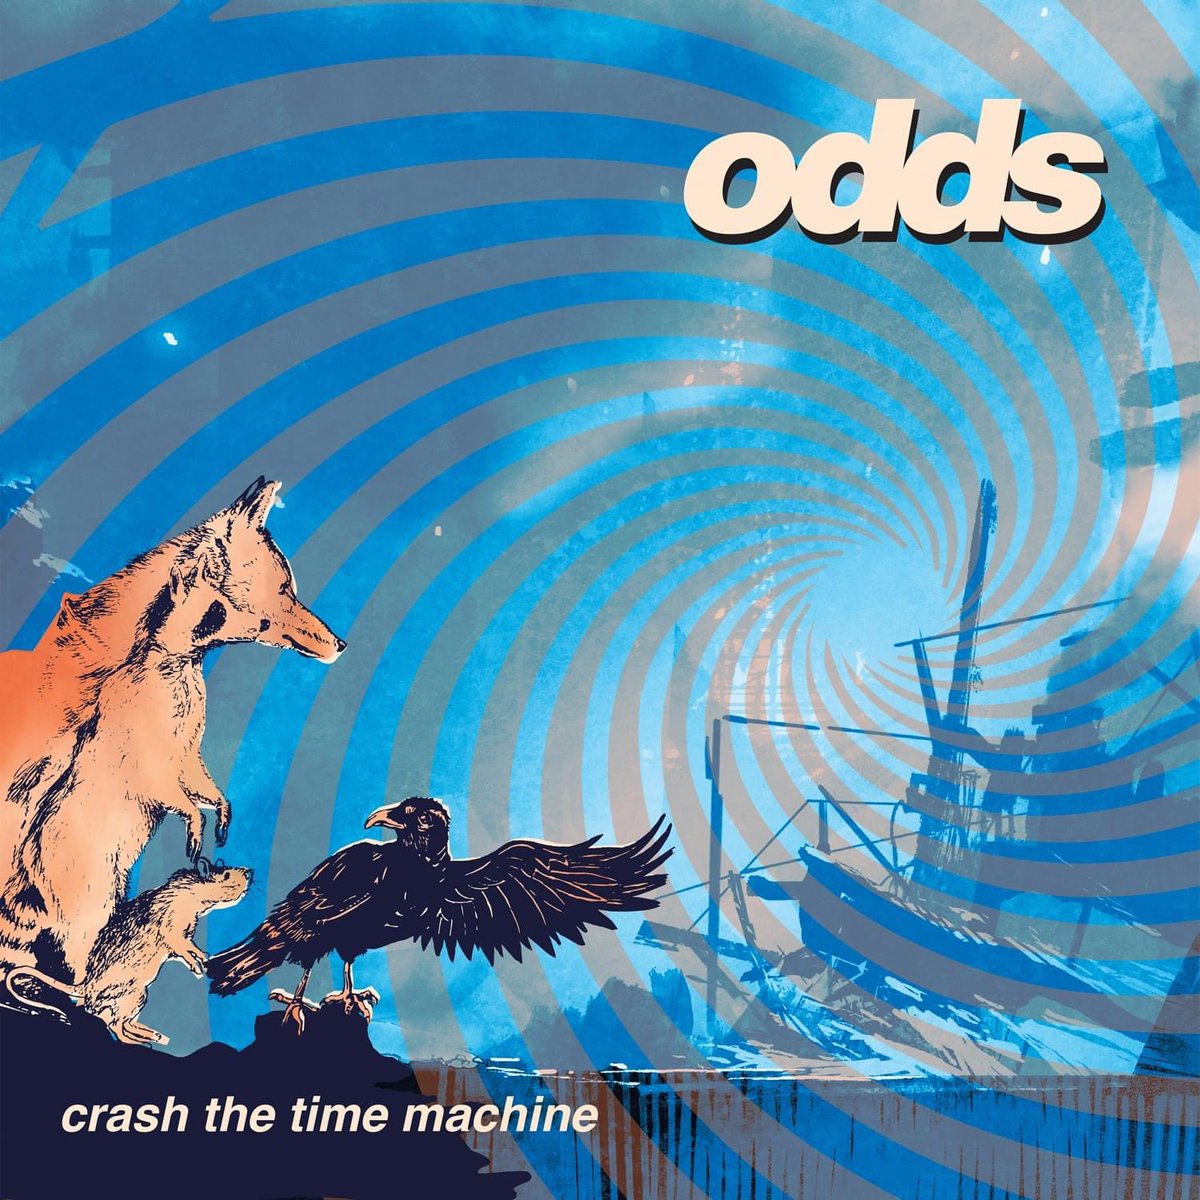 Our new record Crash the Time Machine is also available now on @Bandcamp for #BandcampFriday ➡️: oddsmusic.bandcamp.com/album/crash-th…